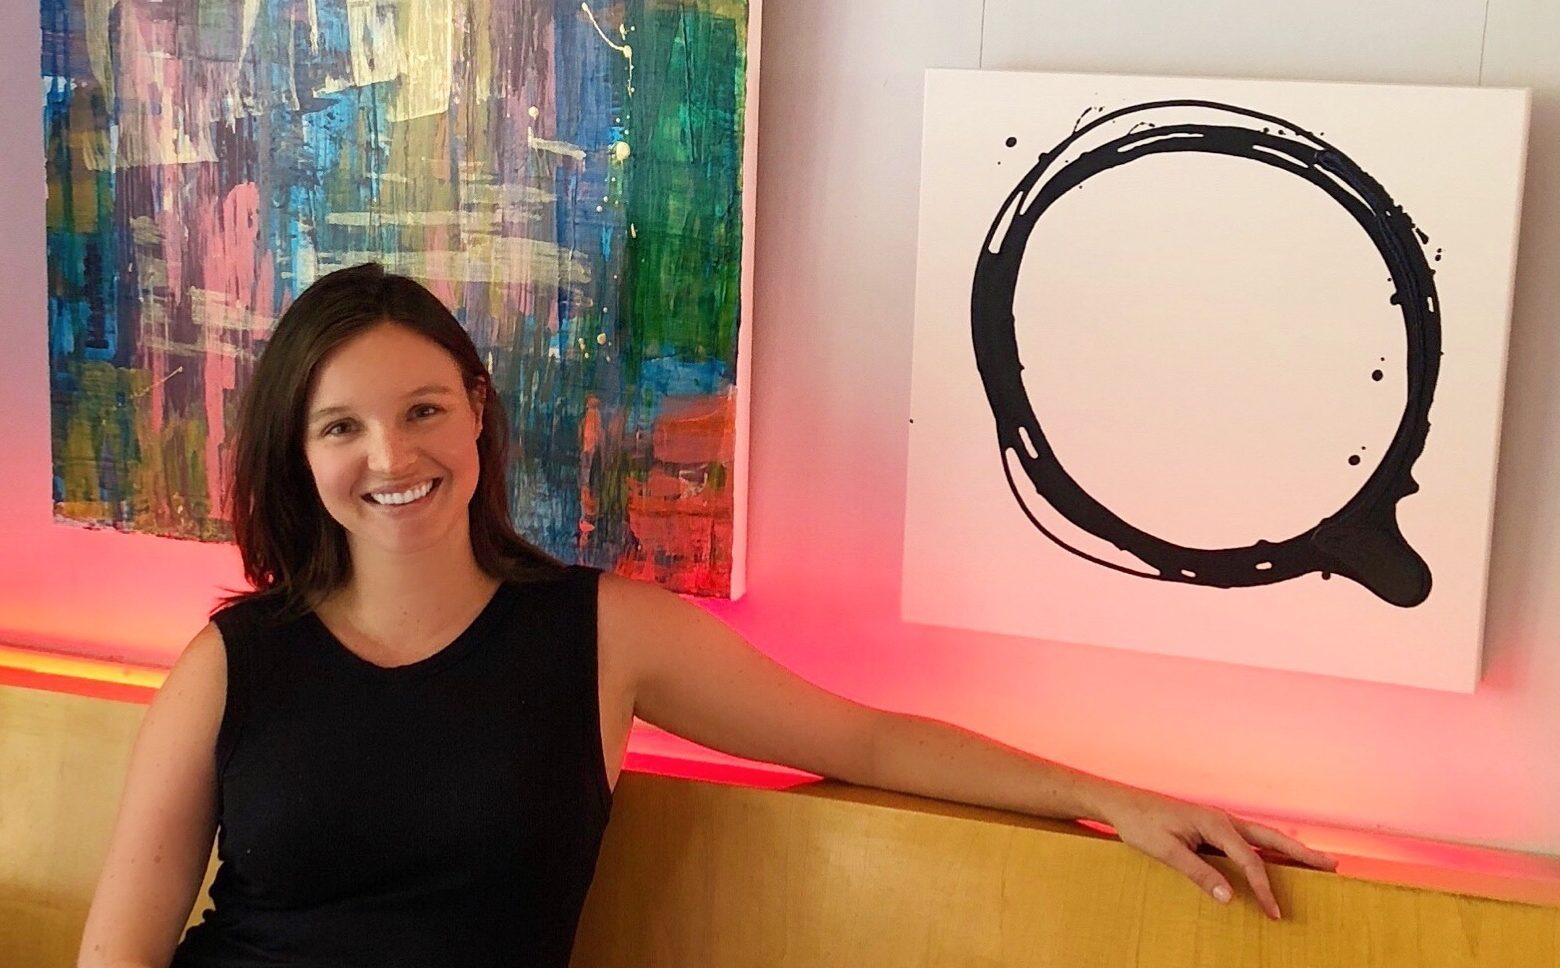 Caitlin Wheeler in front of original paintings installed at Peacock Cafe in Washington DC